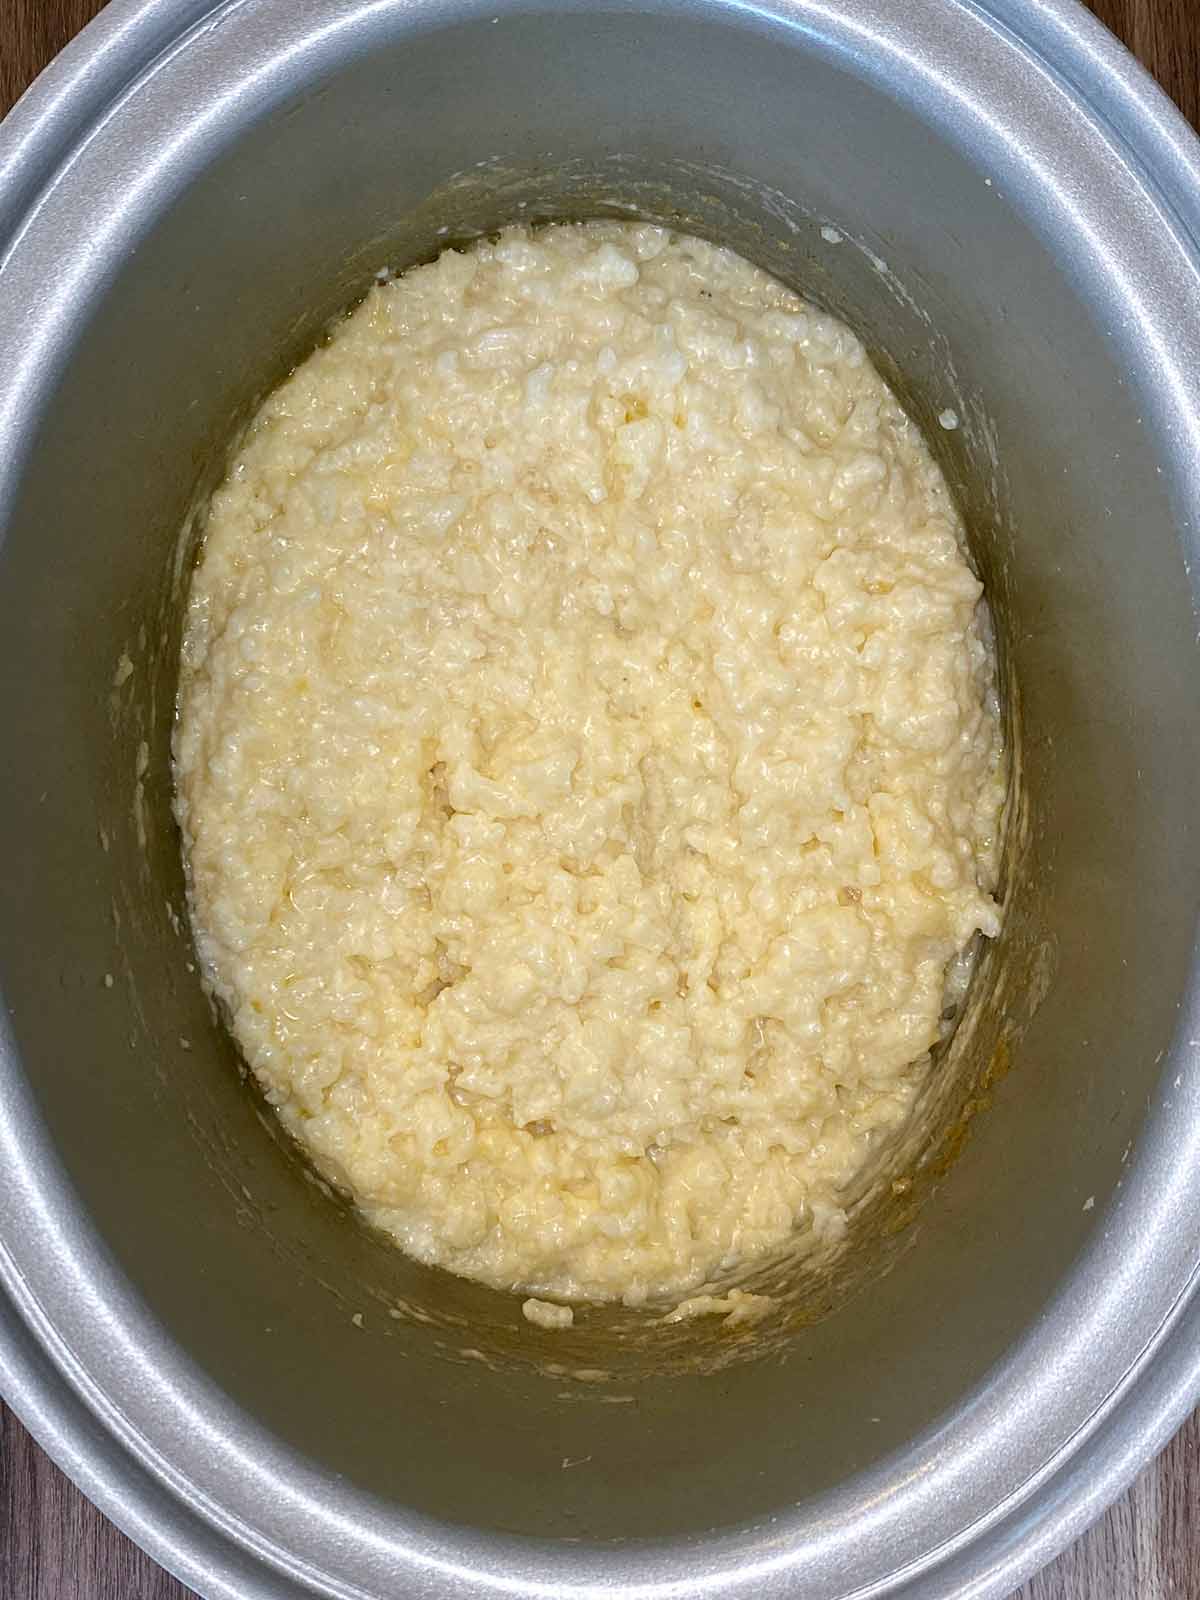 Cooked rice pudding in a slow cooker bowl.